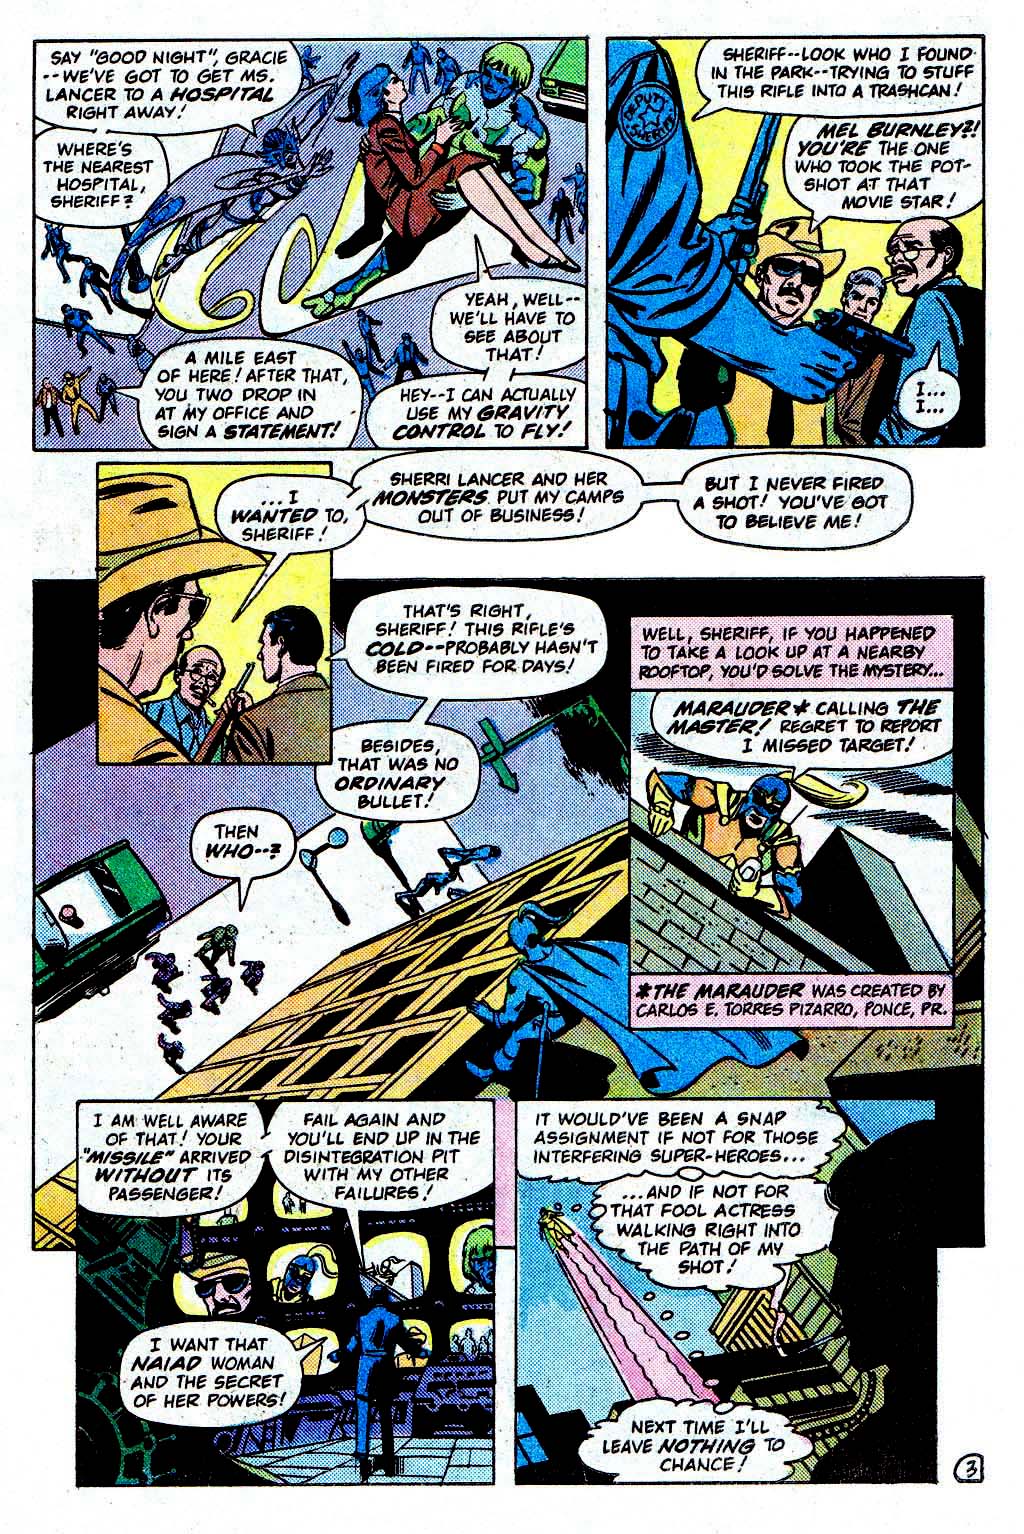 The New Adventures of Superboy 35 Page 42